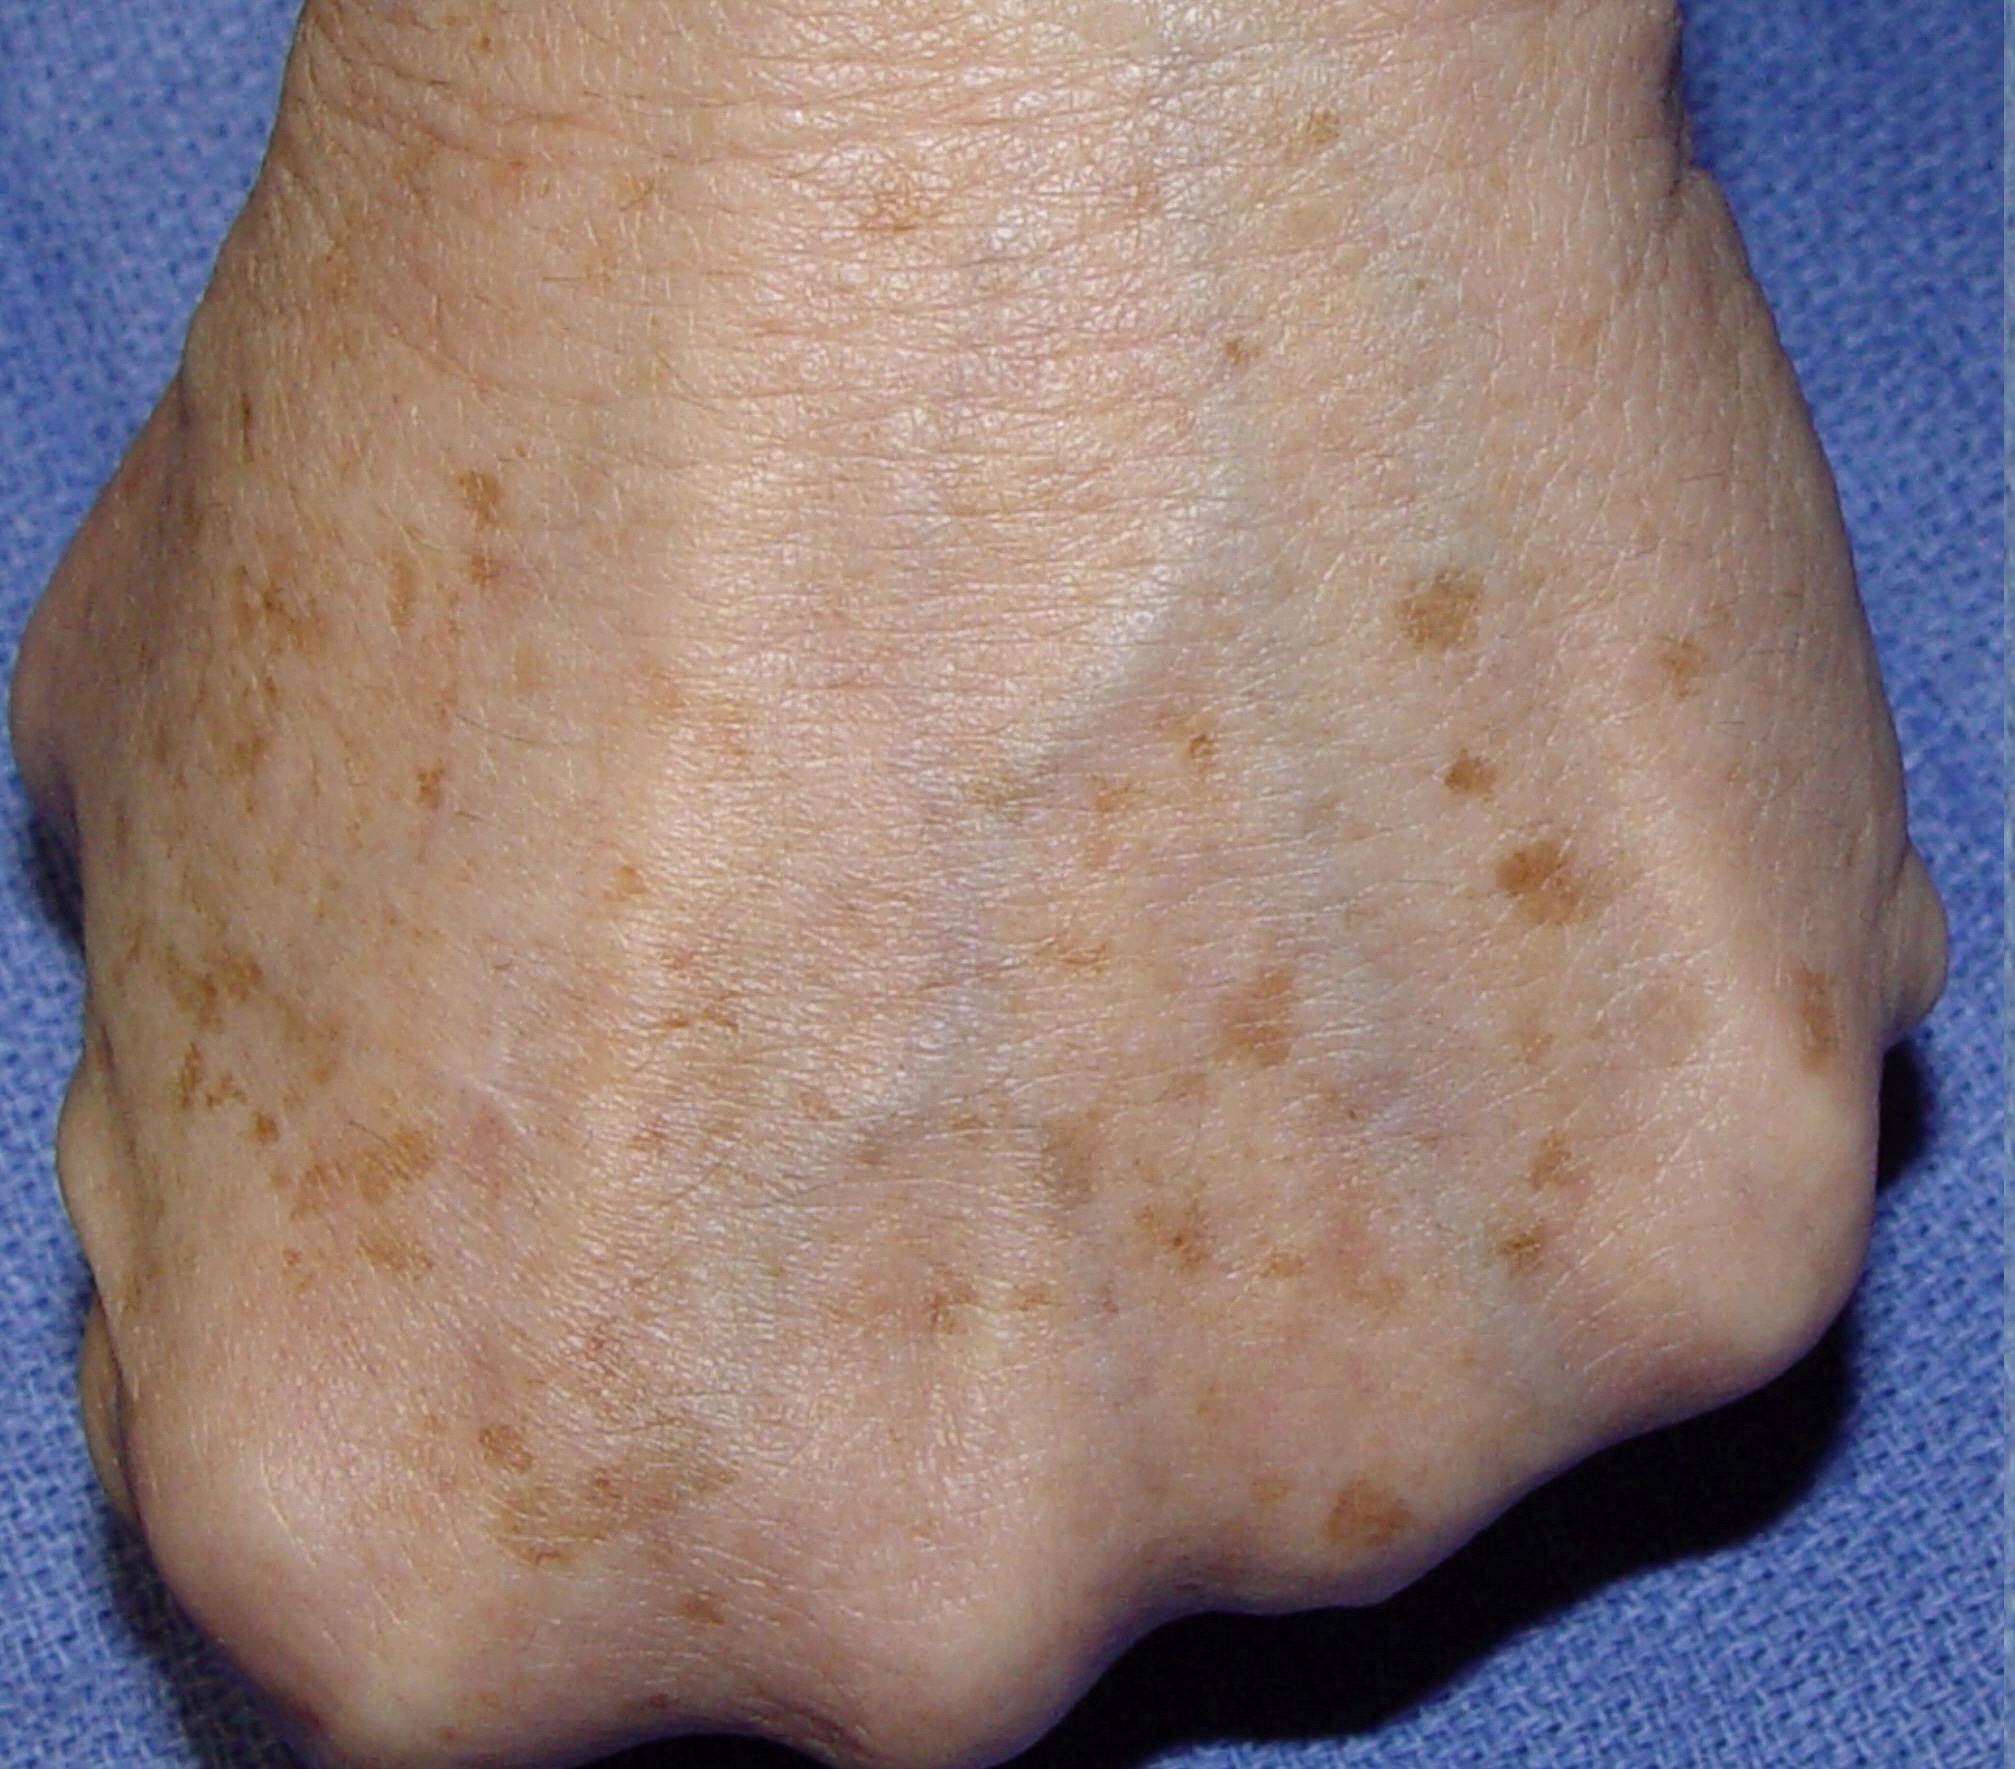 Hyperpigmentation Treatments Back of hand showing age spots